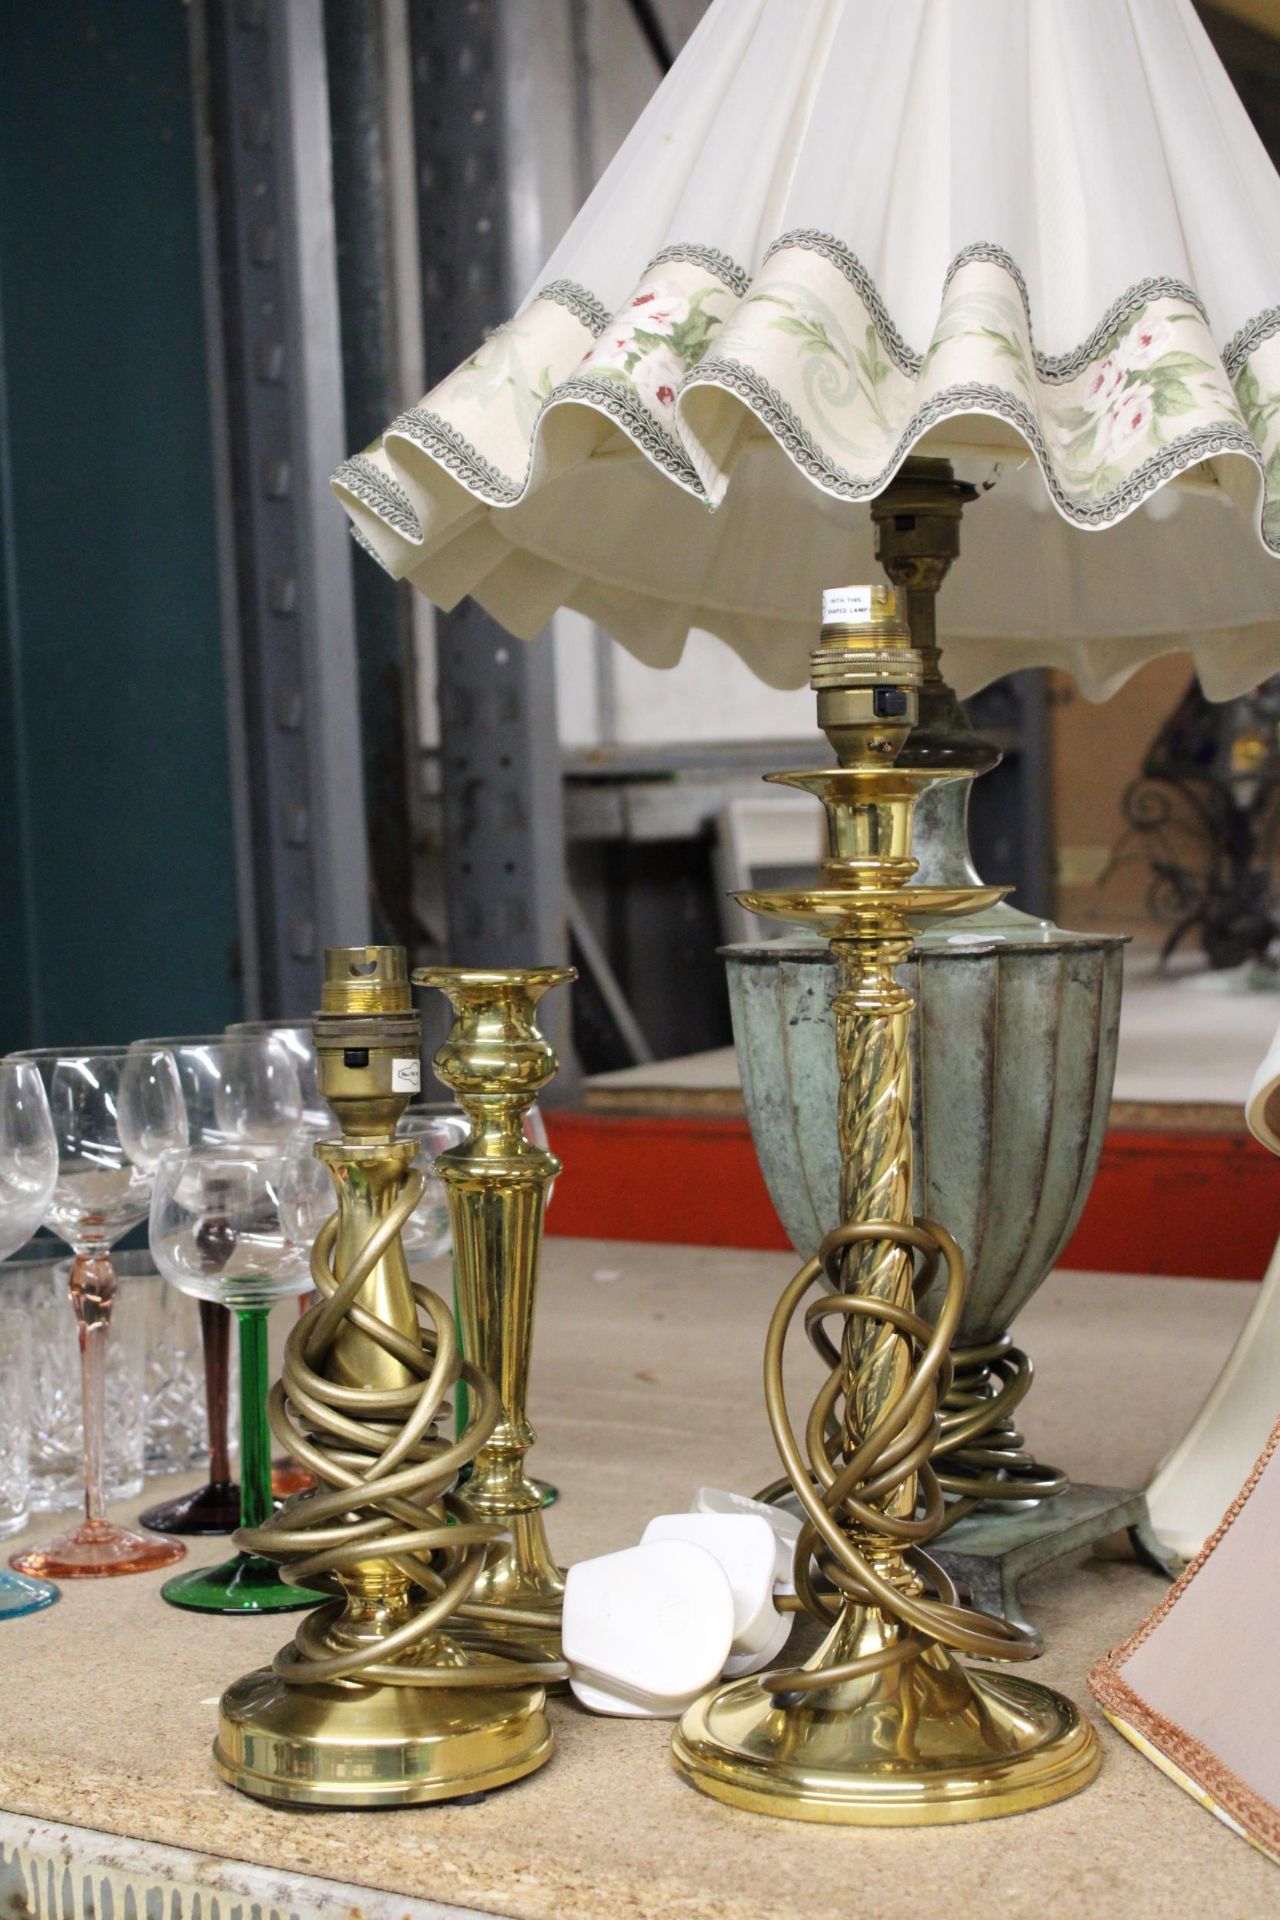 A HEAVY METAL TABLE LAMP WITH CREAM AND FLORAL SHADE, PLUS THREE BRASS TABLE LAMPS AND FOUR SHADES - Image 2 of 5